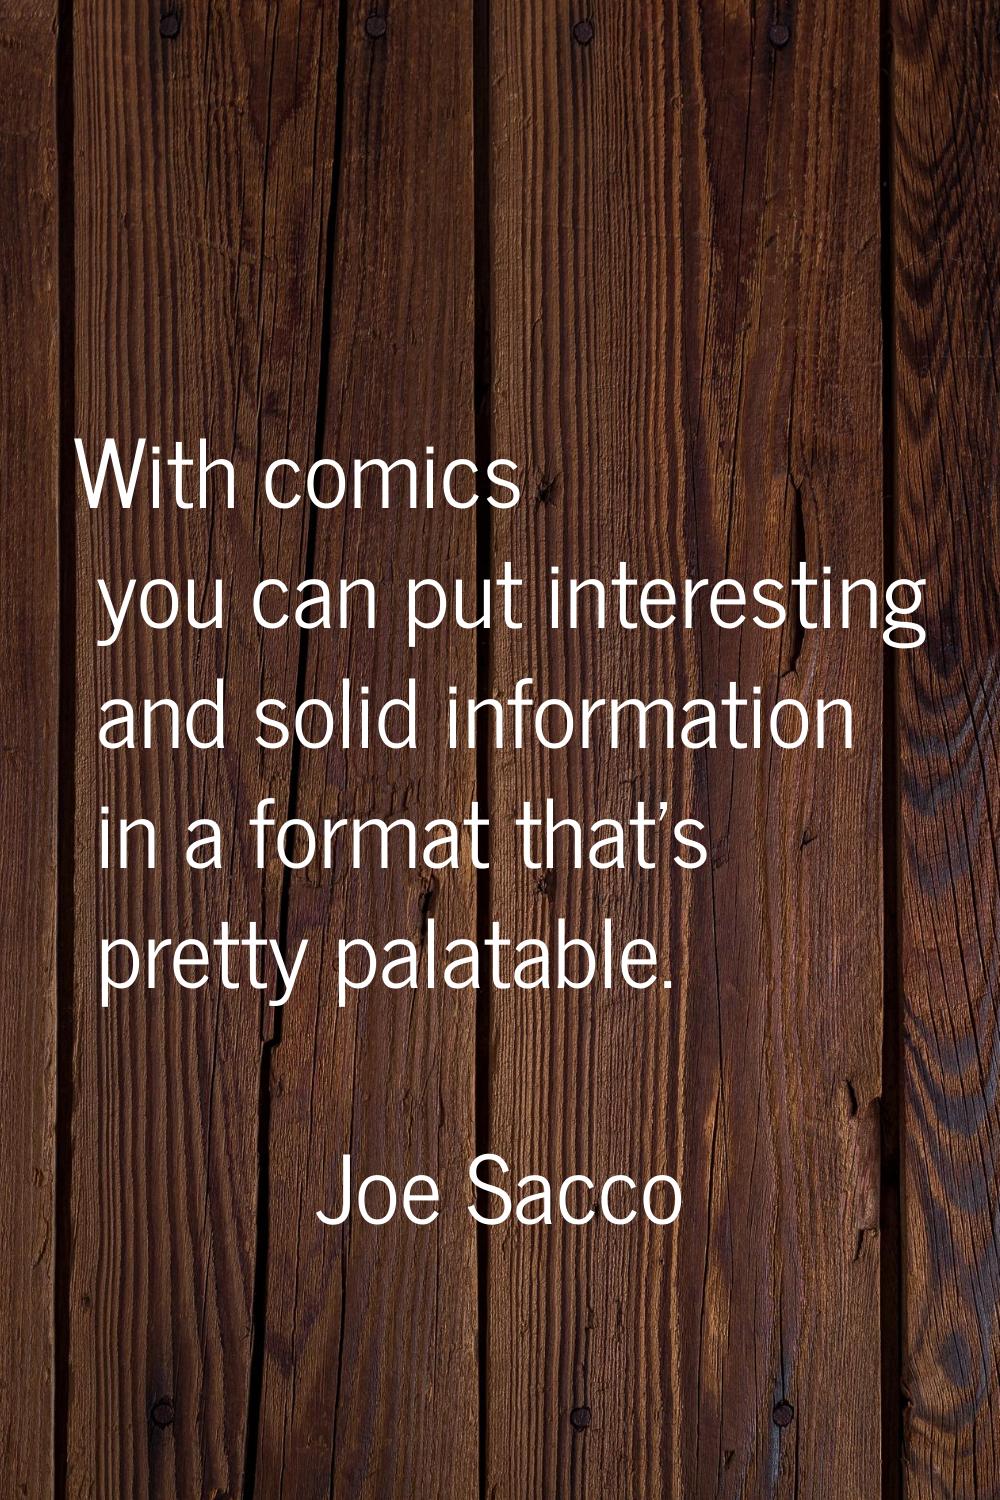 With comics you can put interesting and solid information in a format that's pretty palatable.